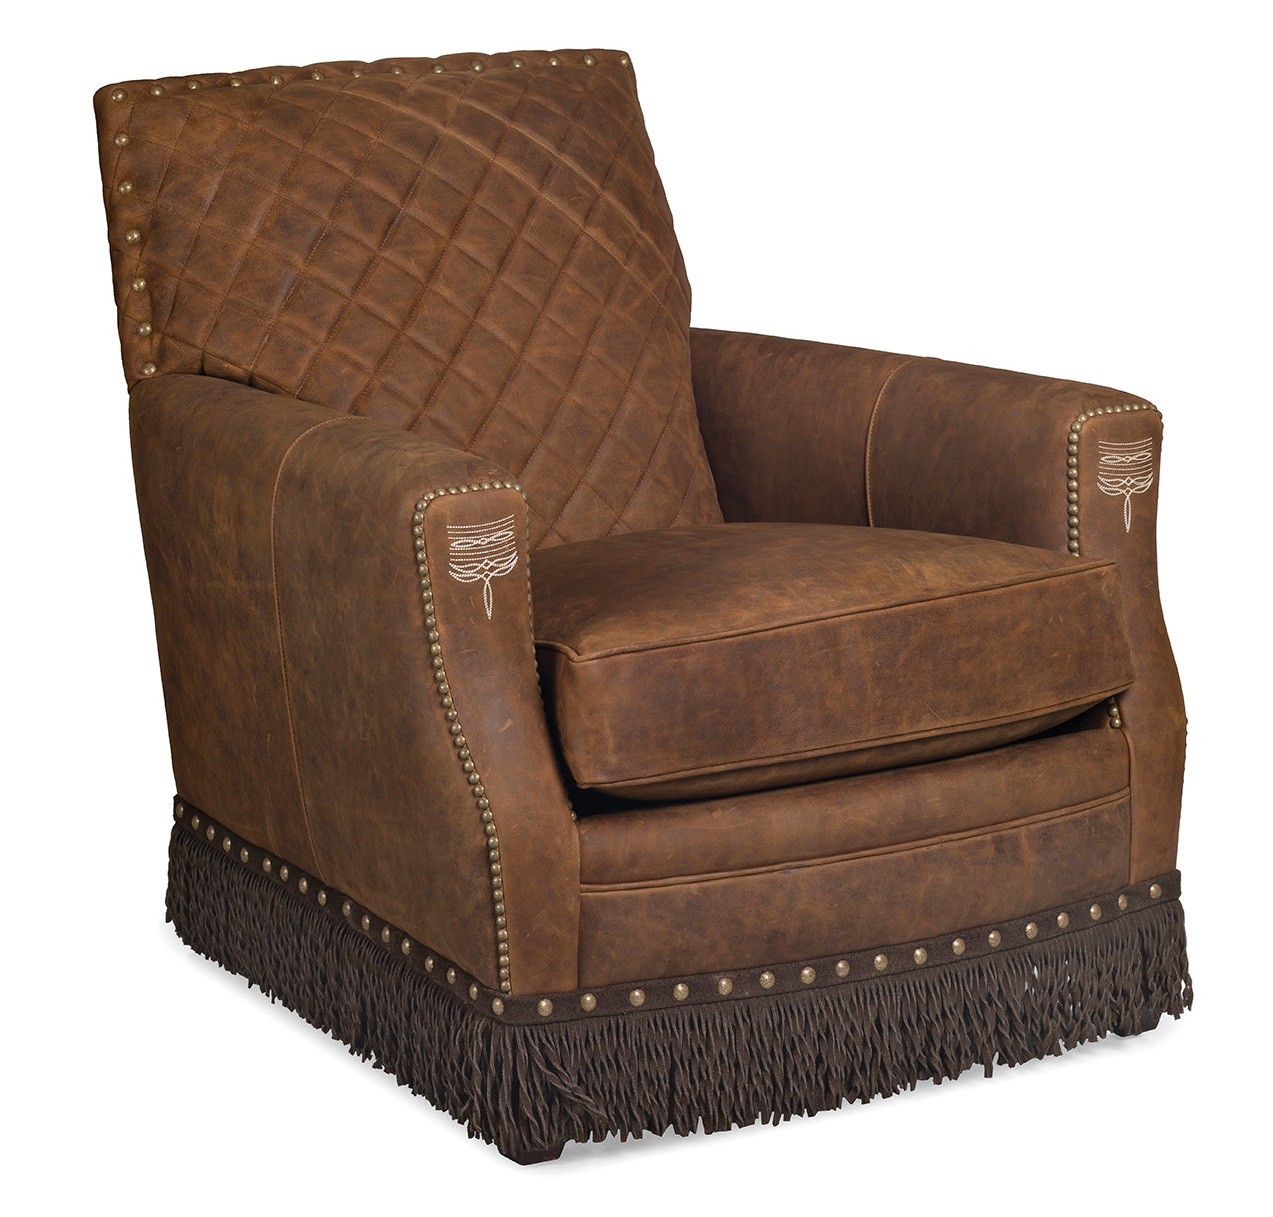 CHAIRS, Leather, Upholstered, Accent Deluxe Rustic Caramel Armchair with Fringe